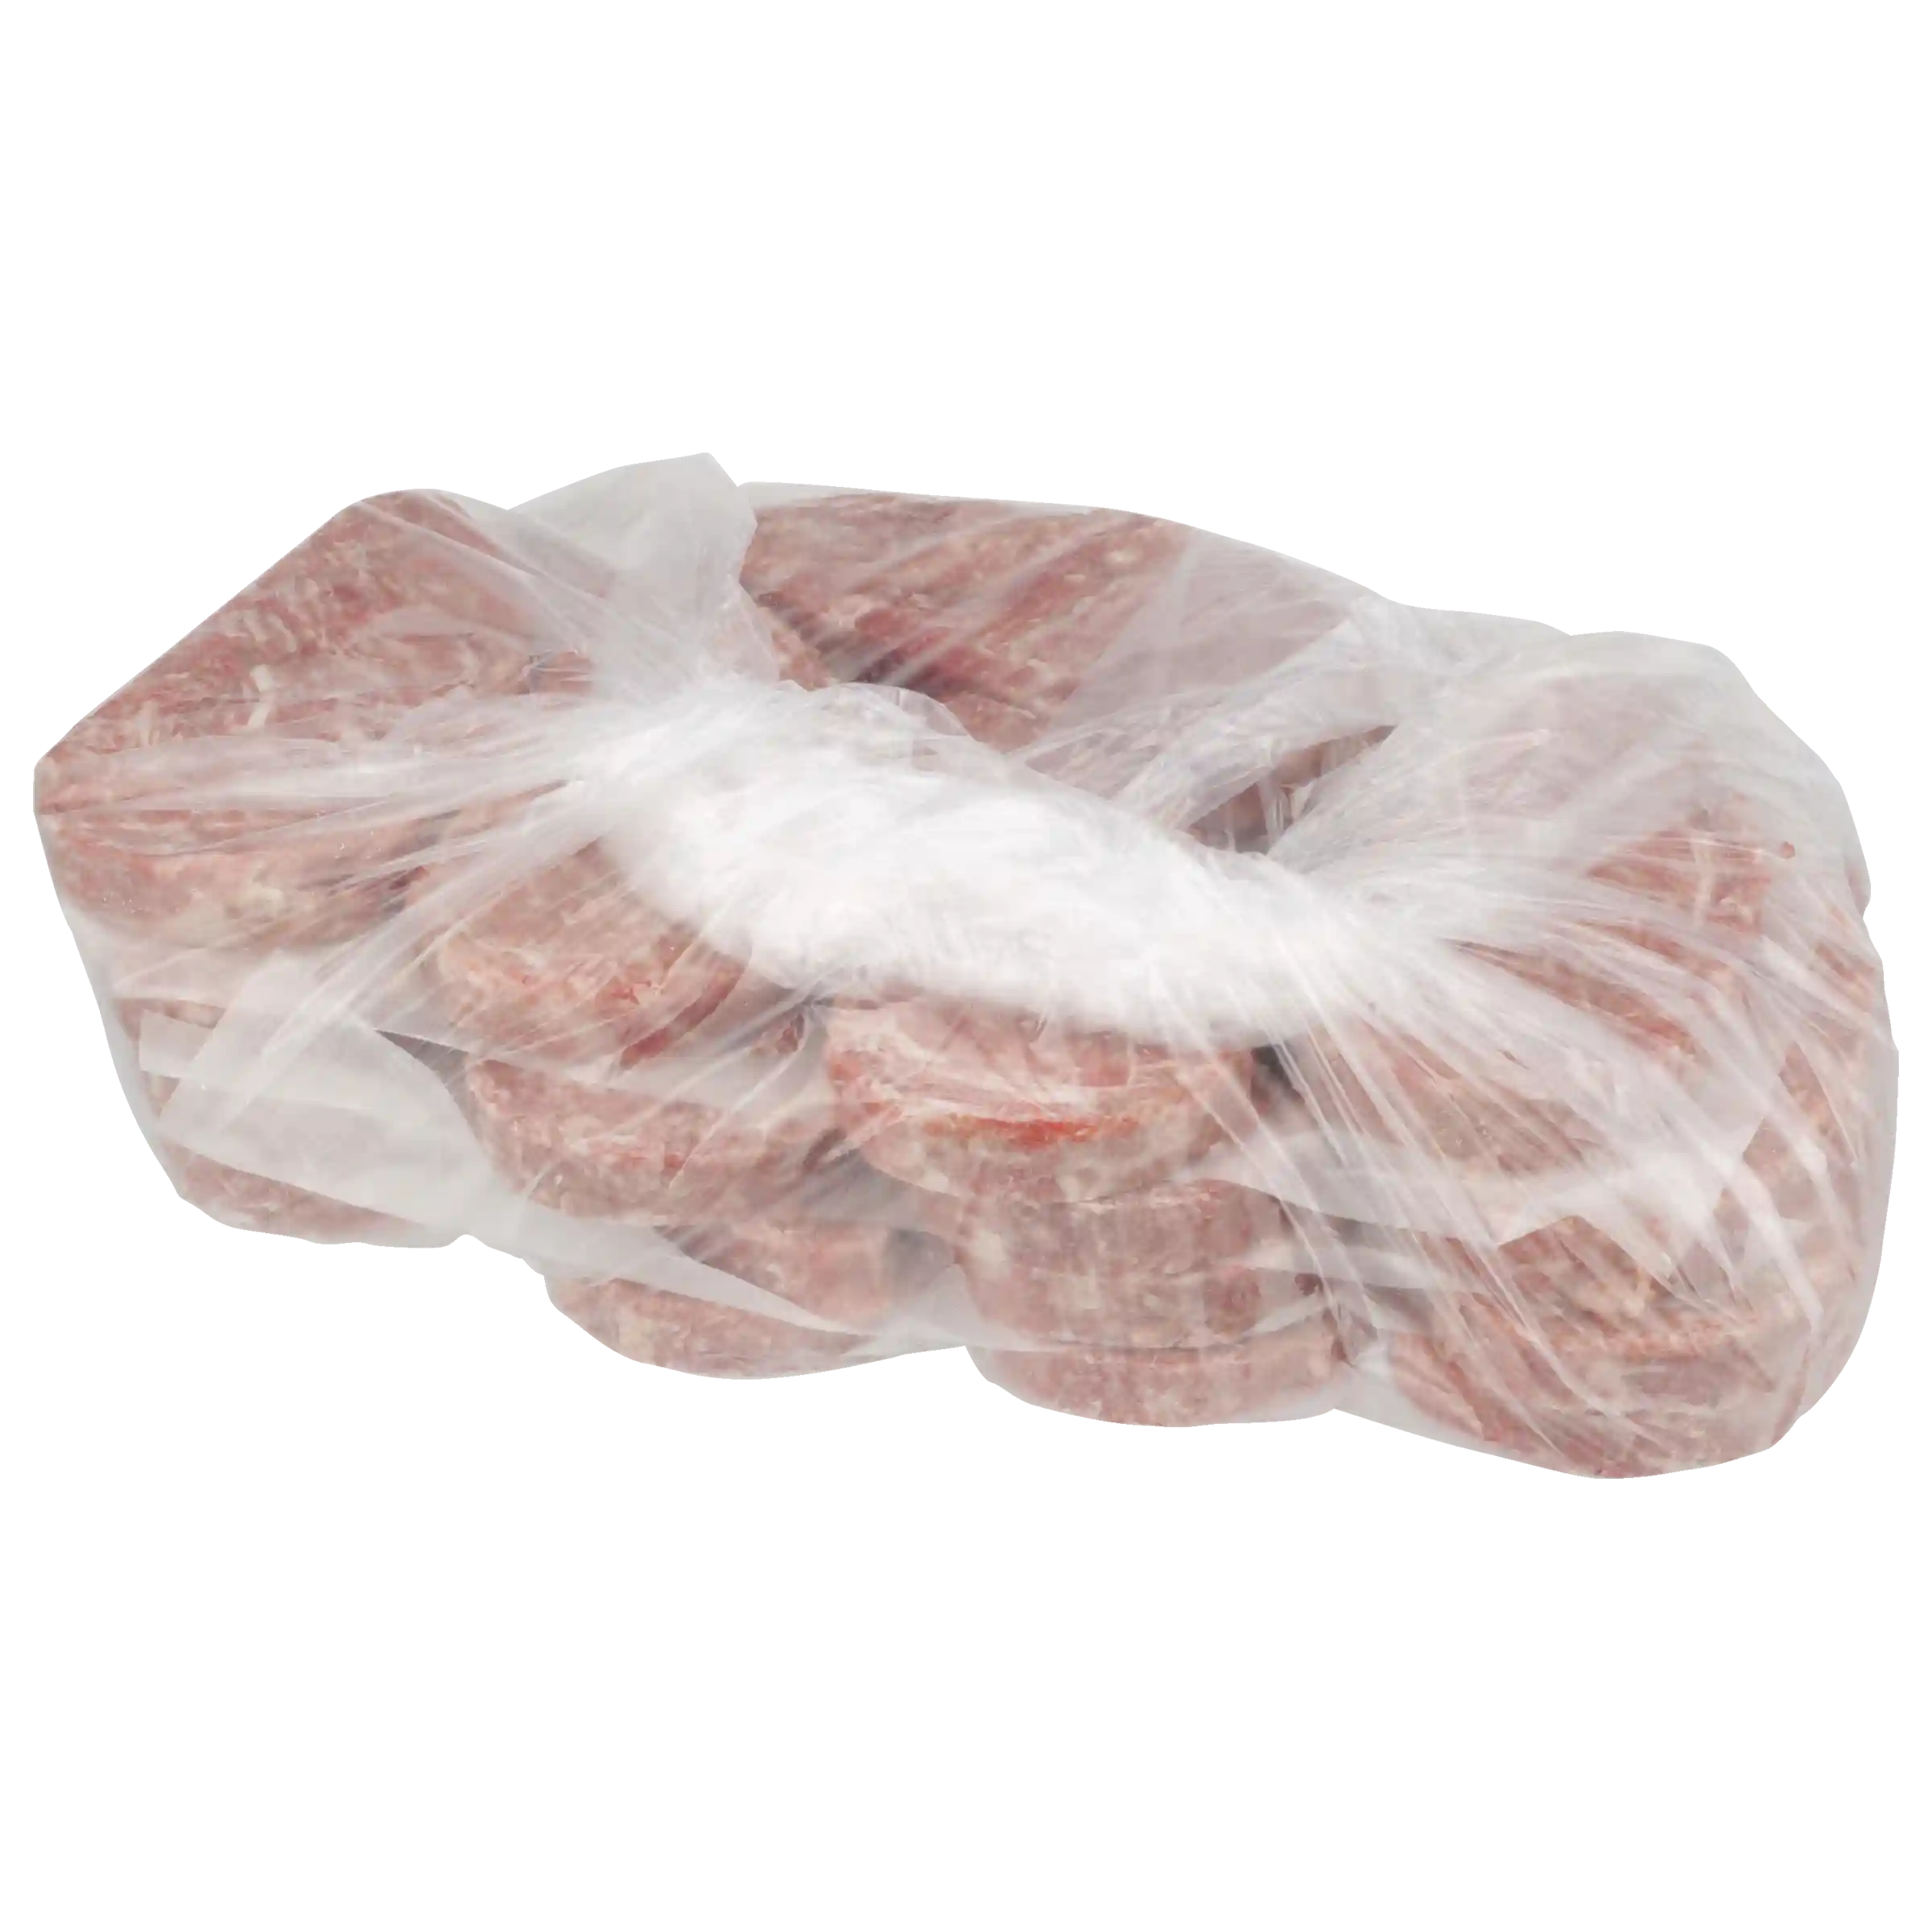 Steak-EZE® Thinly Sliced Philly Beef Steak_image_21